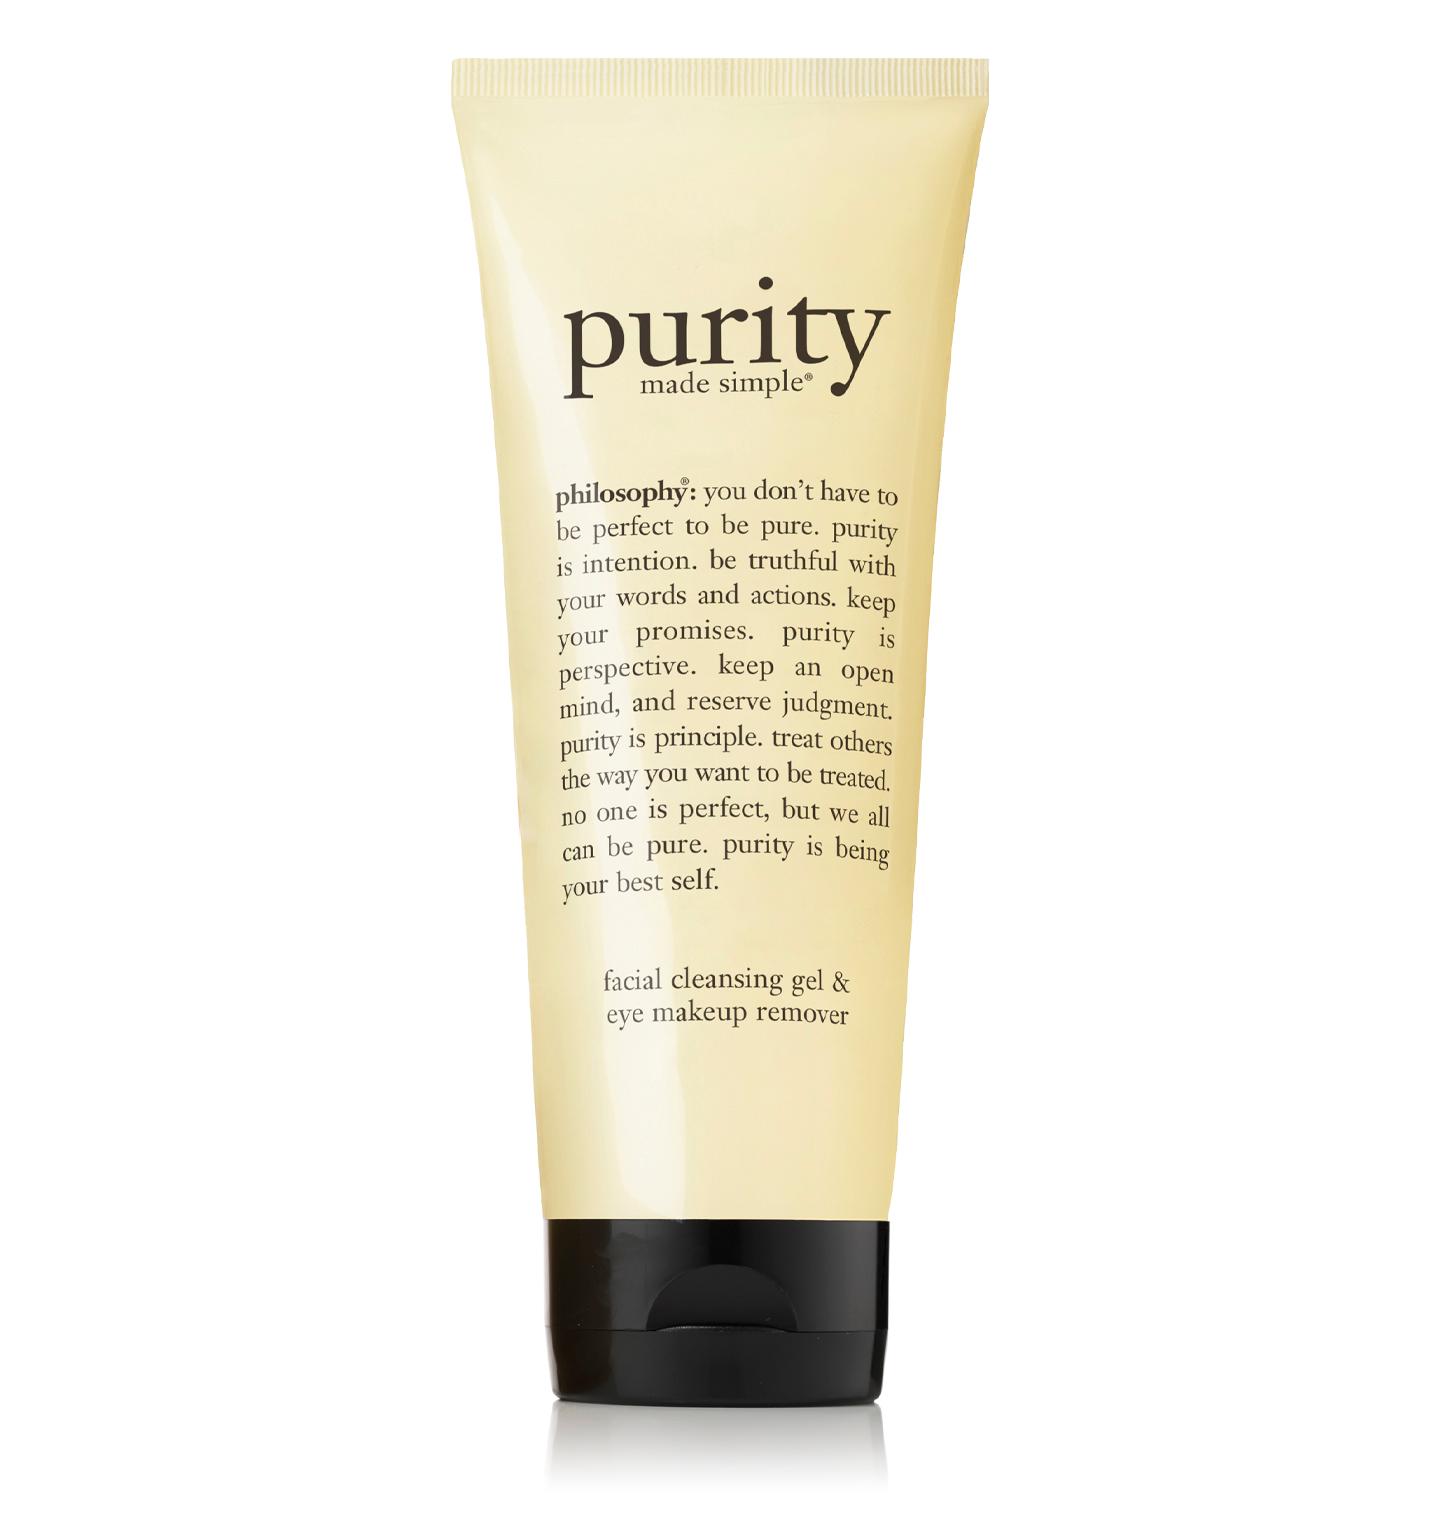 purity made simple facial cleansing gel & eye makeup remover